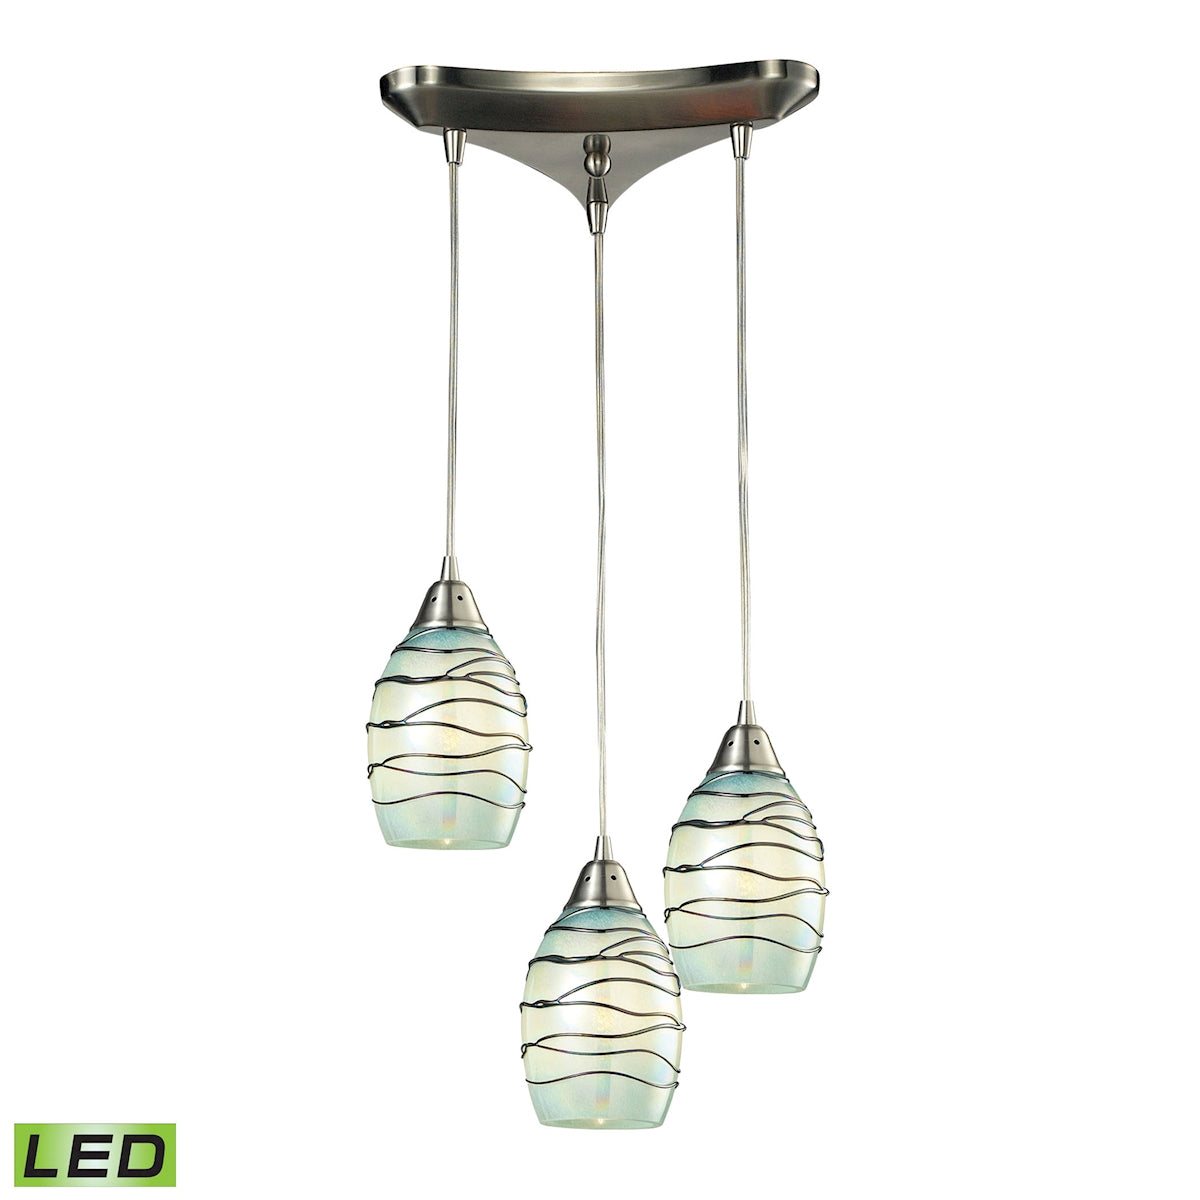 ELK Lighting 31348/3MN-LED Vines 3-Light Triangular Pendant Fixture in Satin Nickel with Mint Glass - Includes LED Bulbs